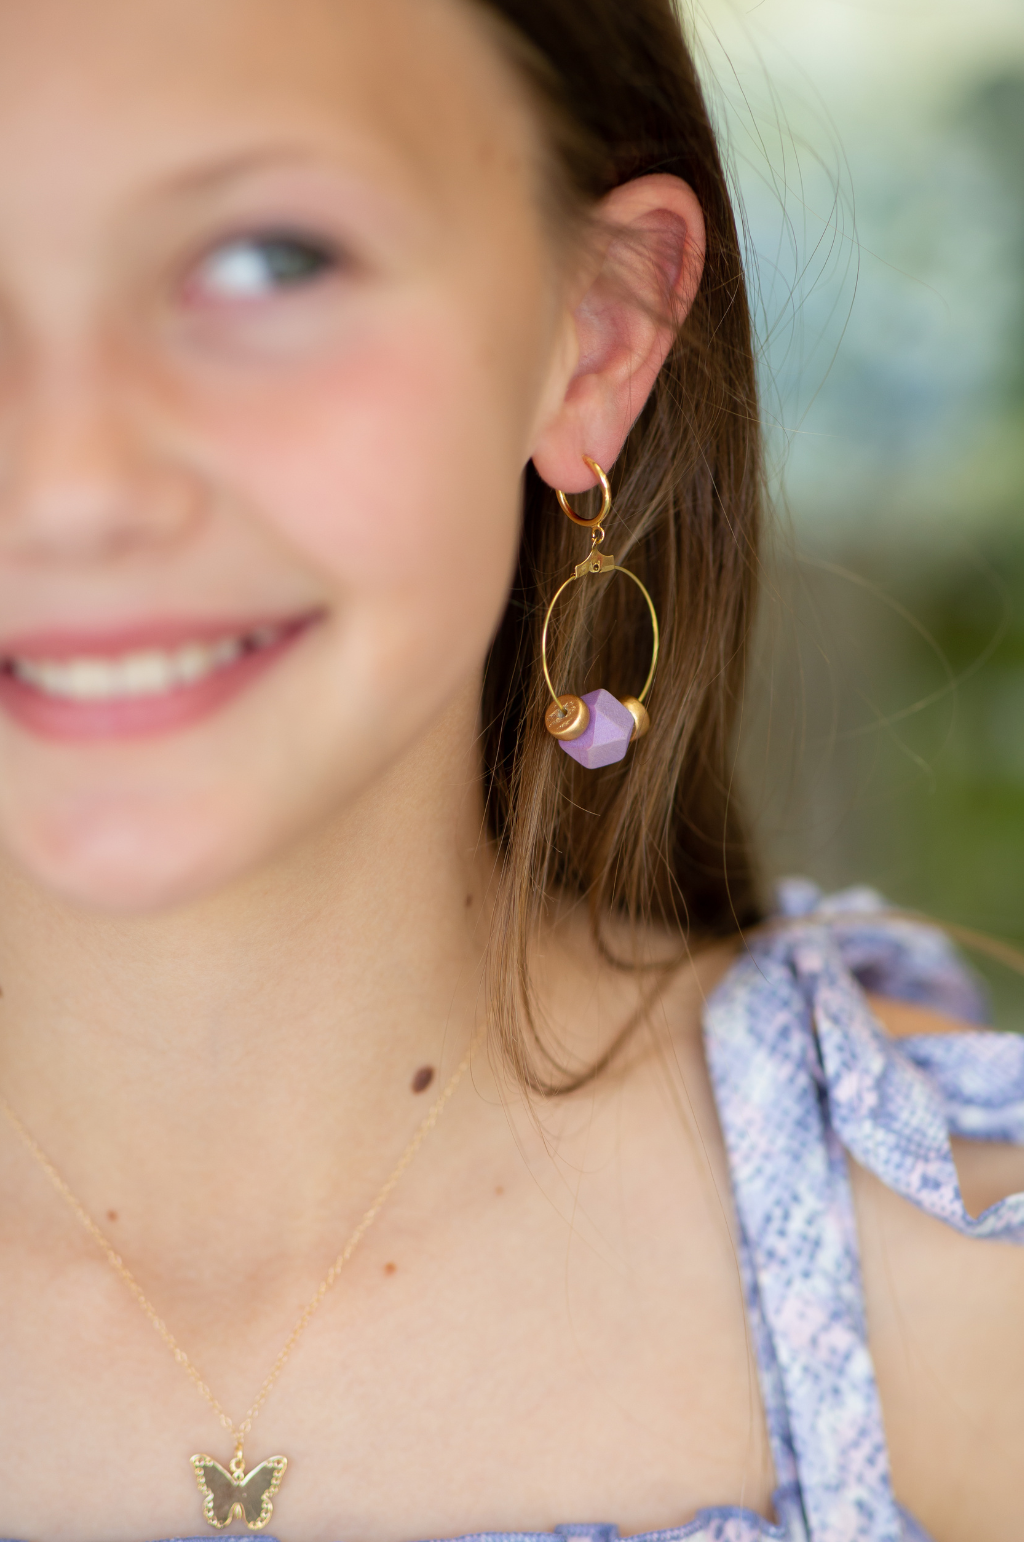 The Helen 'Gracie' Earrings by Annie Claire Designs - SoSis